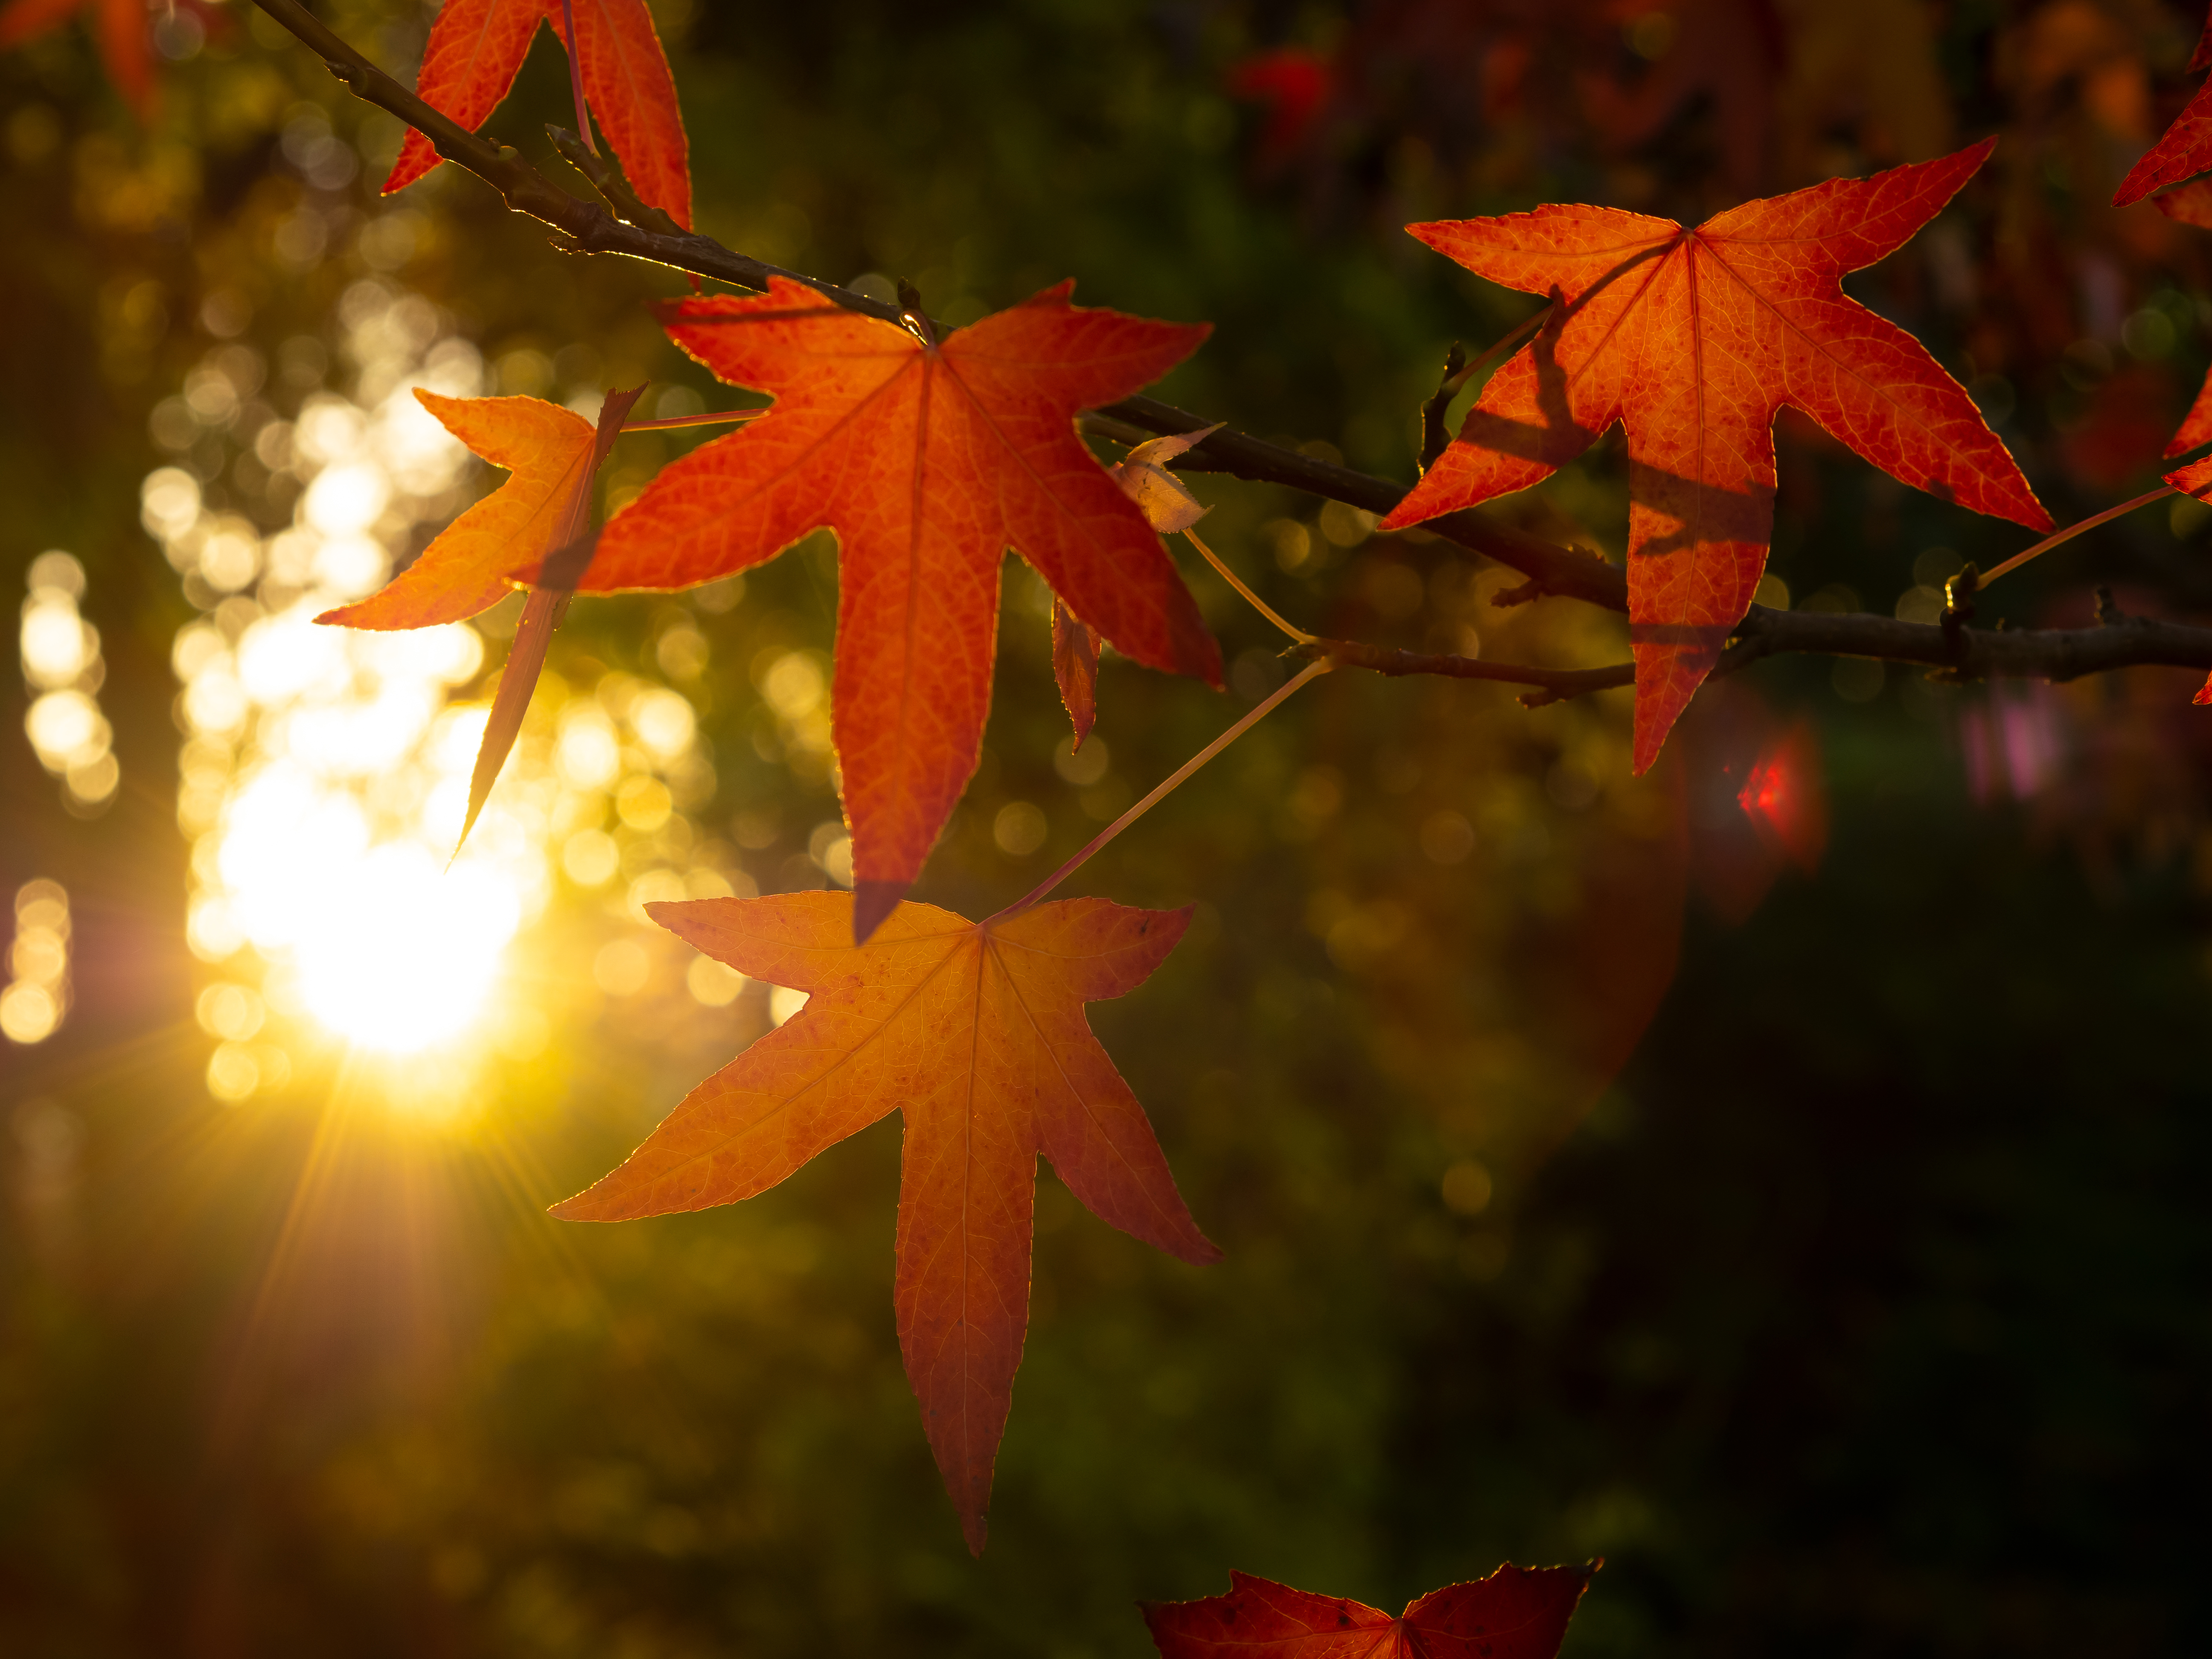 Red leaves in the autumn sun, 1/125s, f/5, ISO200, 45mm, Photo: Joshua Waller